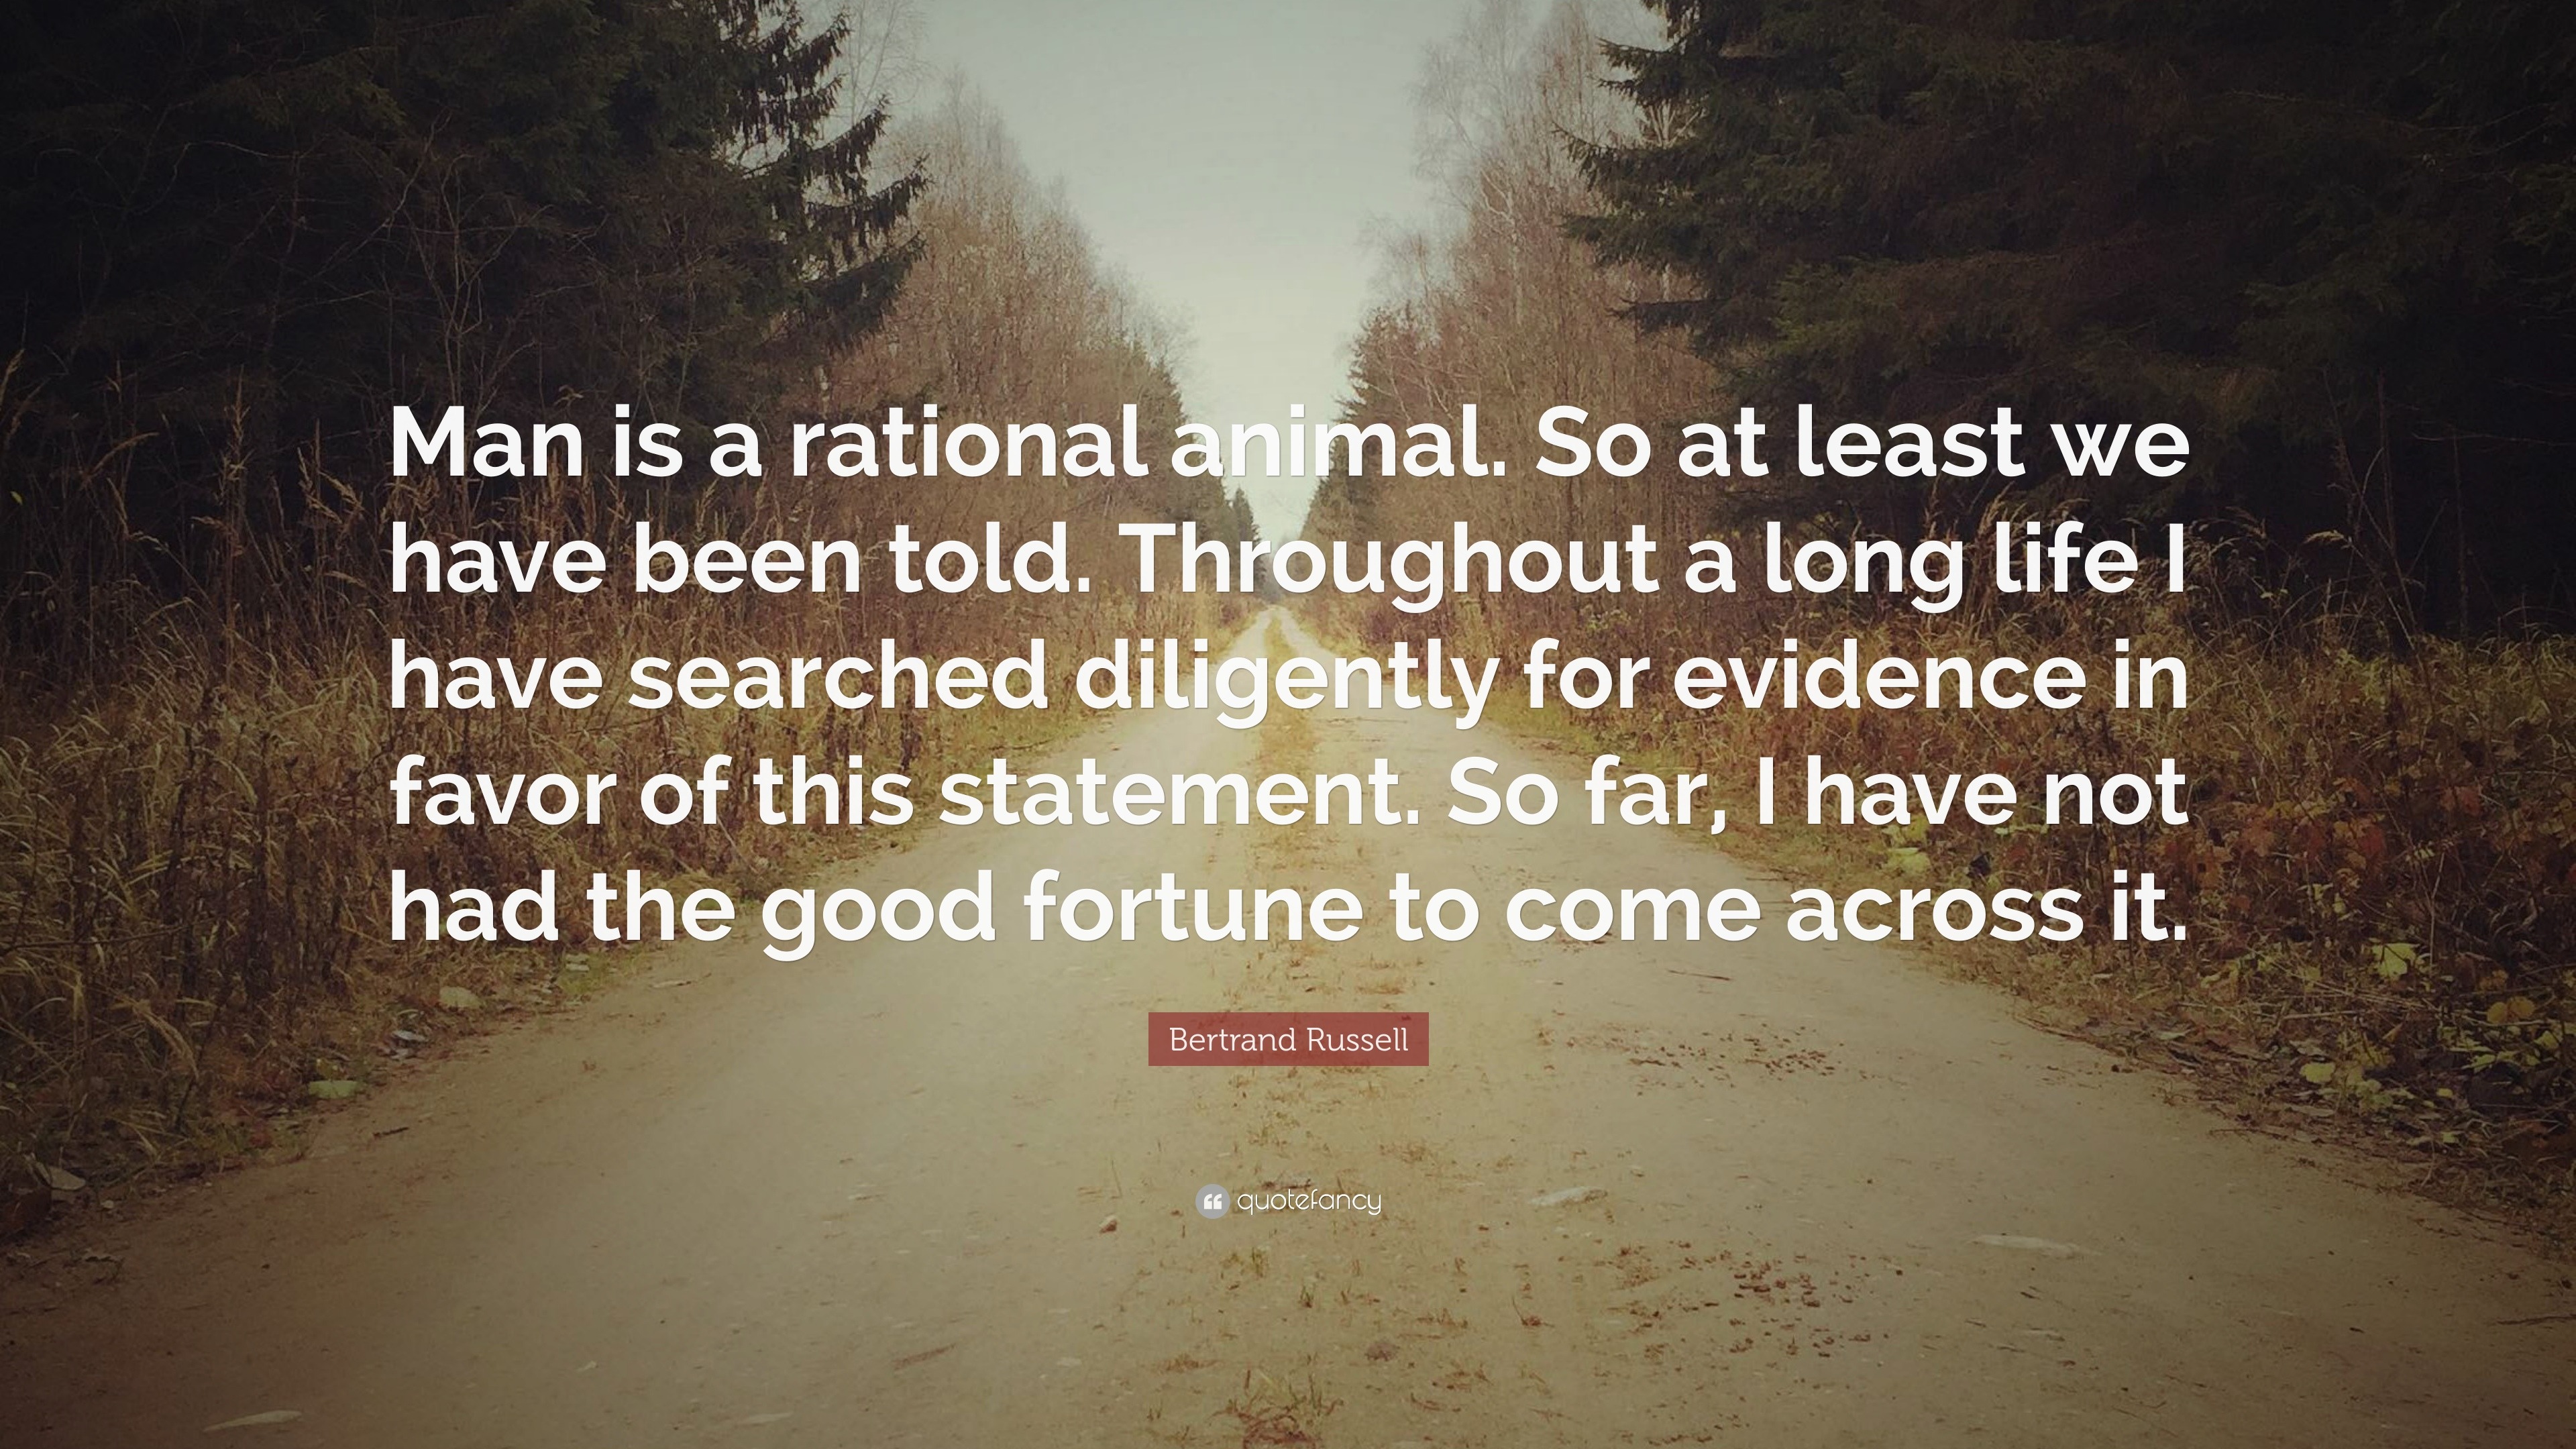 Bertrand Russell Quote: “Man is a rational animal. So at least we have been  told. Throughout a long life I have searched diligently for evidence ...”